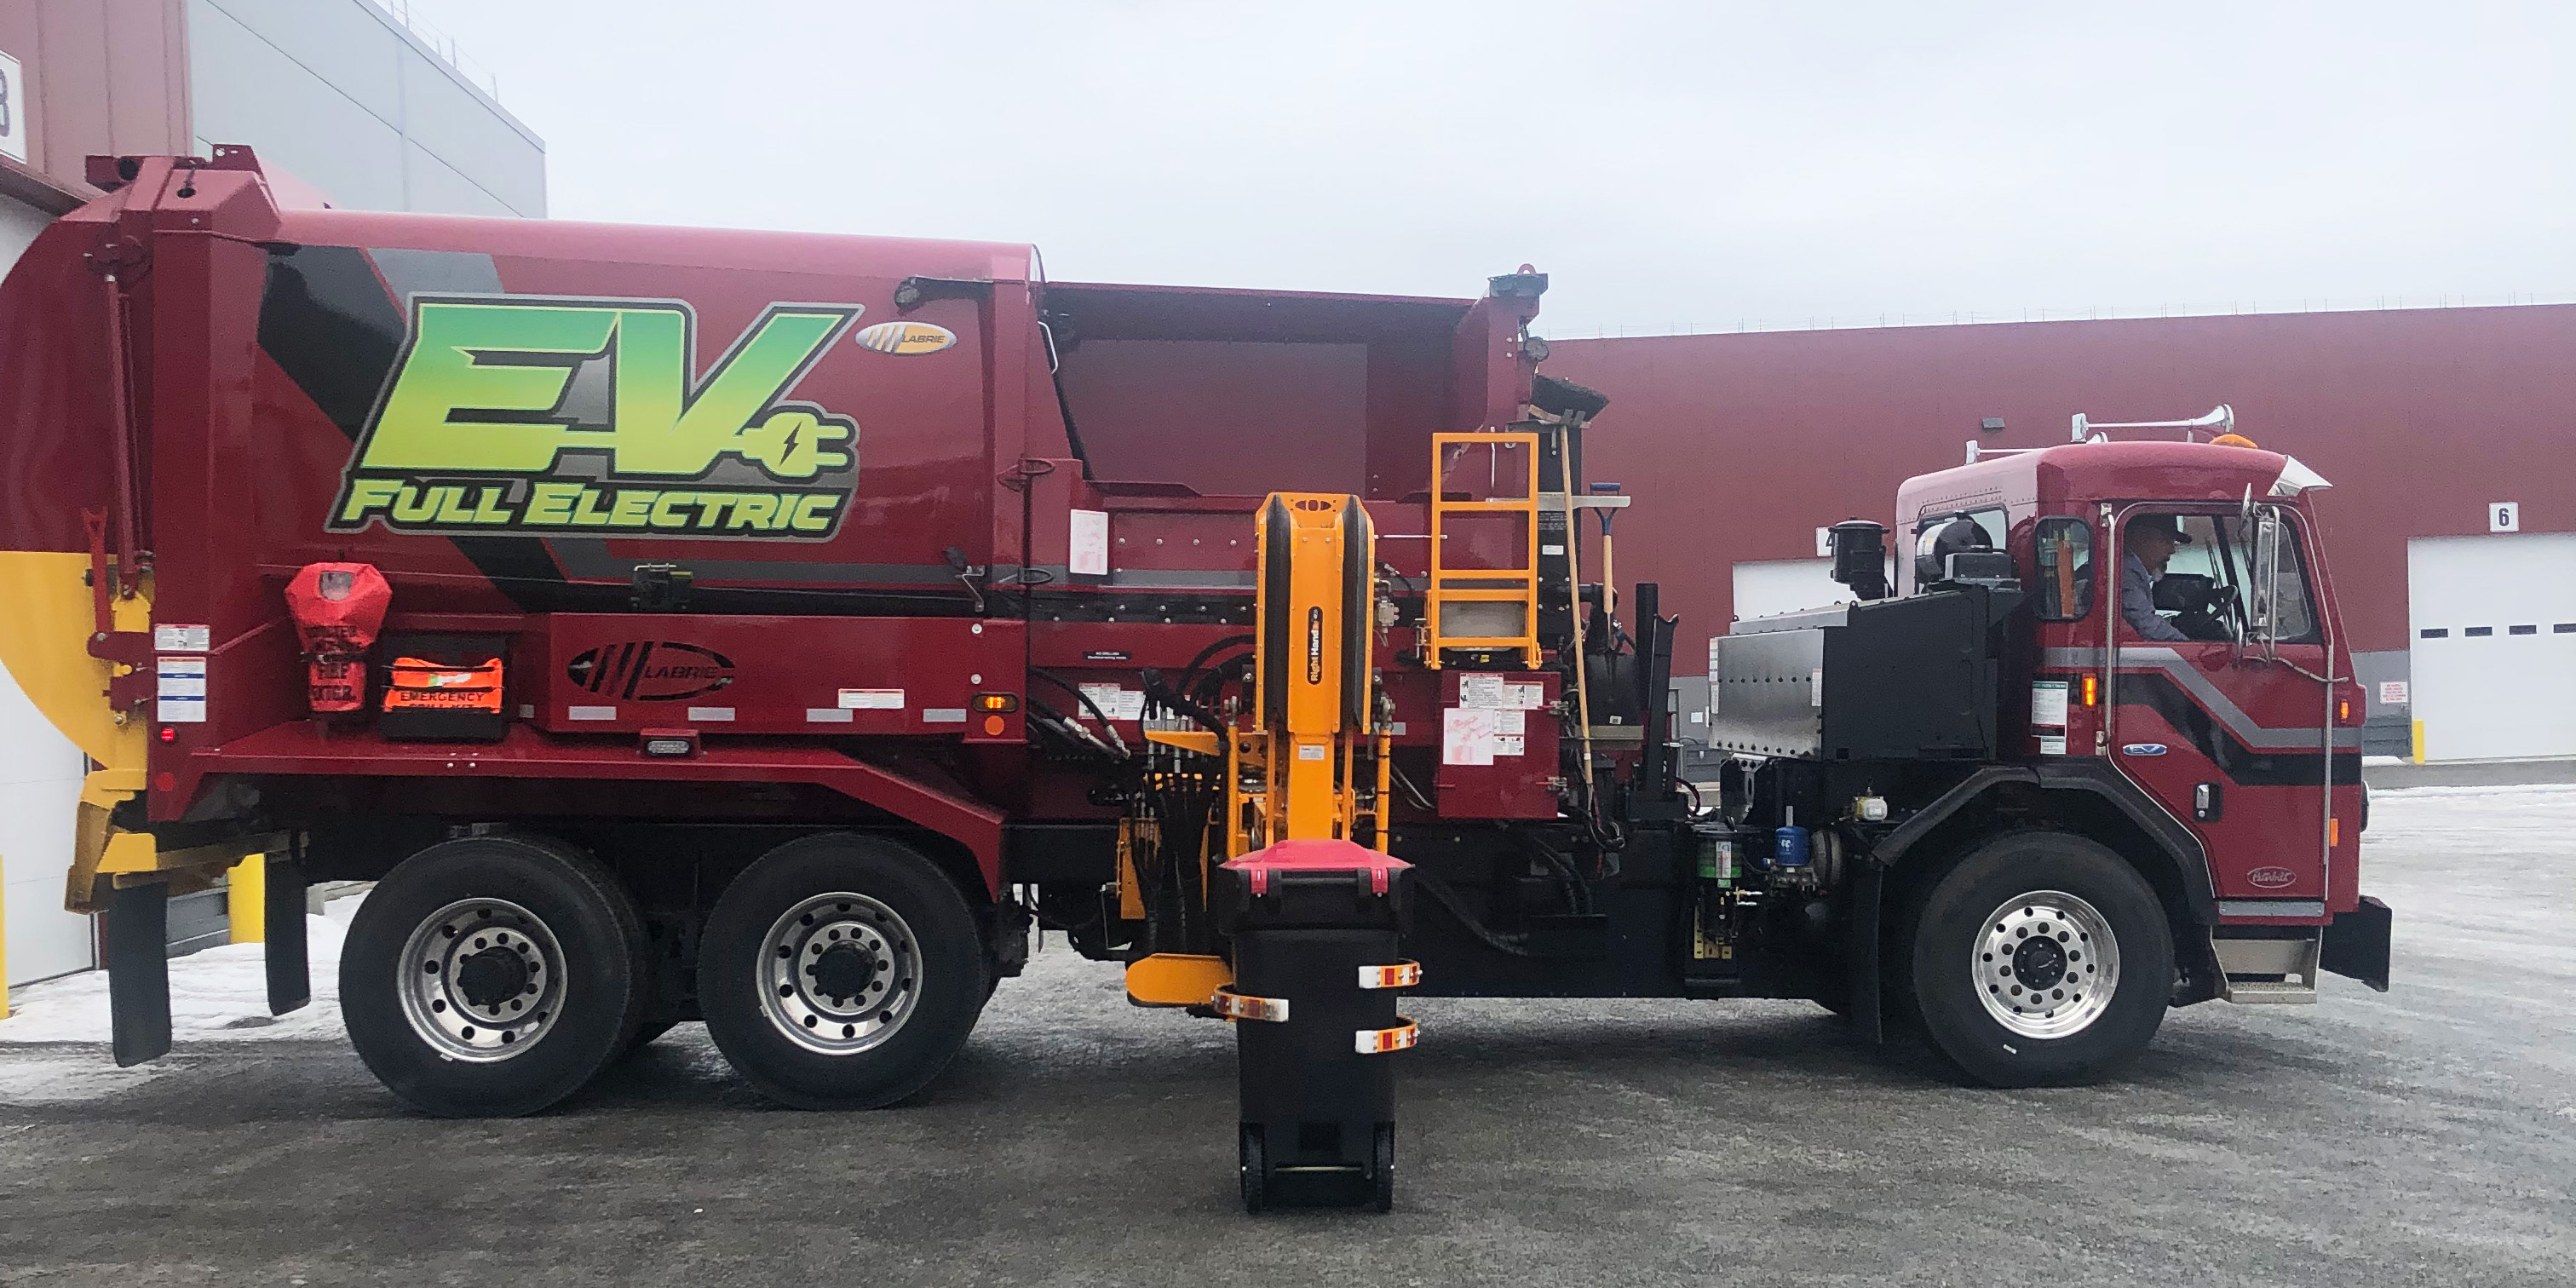 One of the Municipality of Anchorage Solid Waste Services’s brand new electric garbage trucks lifts a bin at the public launch. Photo by Michelle Wilber/ACEP.